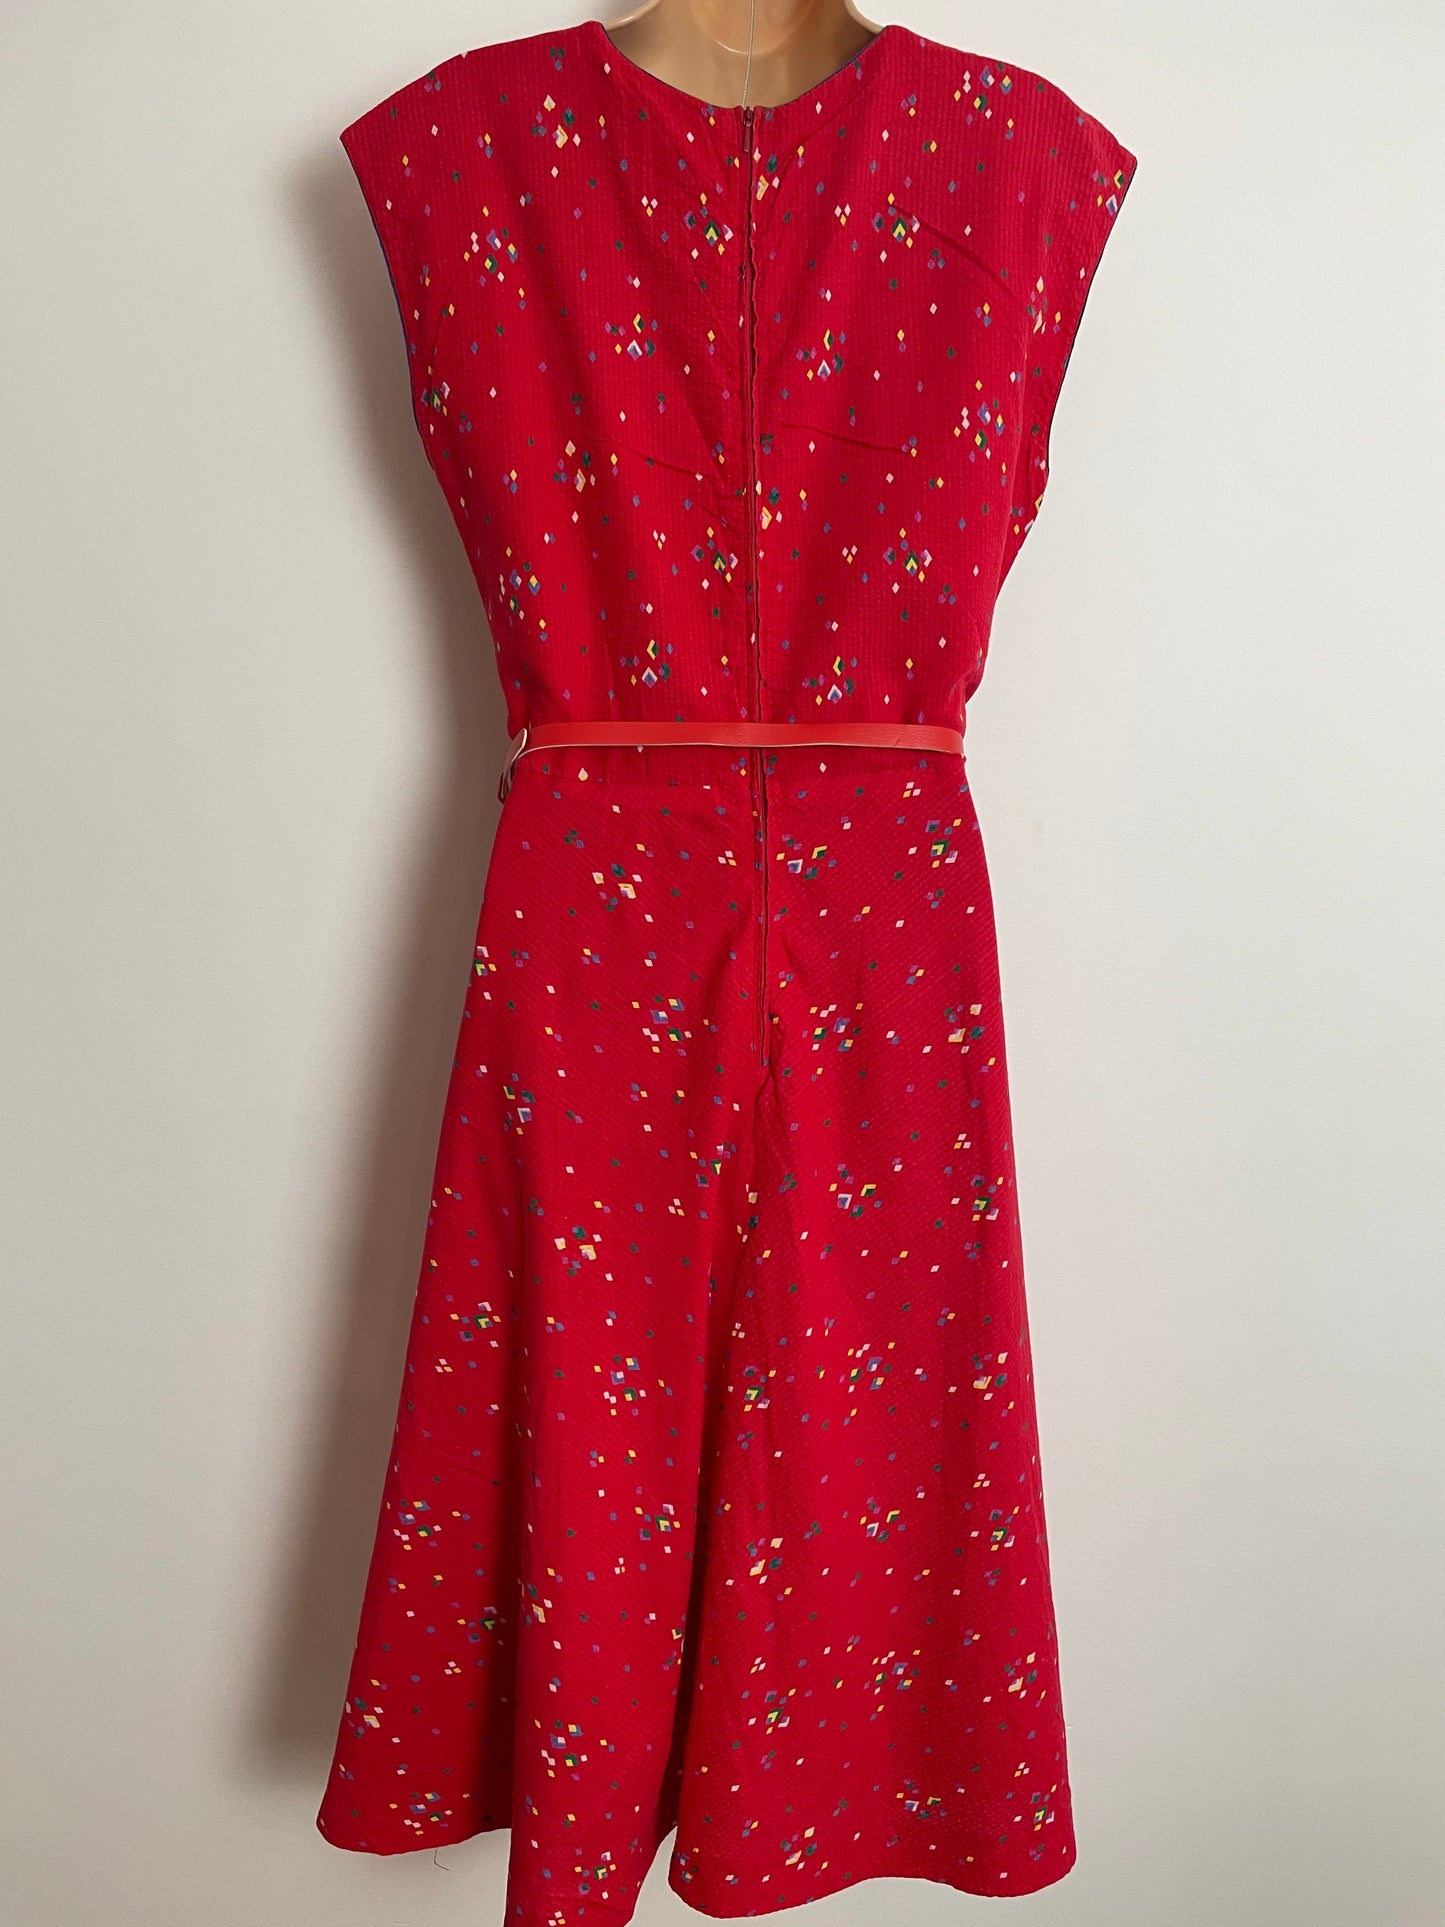 Vintage Early 1980s BETTY BARCLAY UK Size 12 Red Diamond Print Cotton Belted Cap Sleeve Day Dress